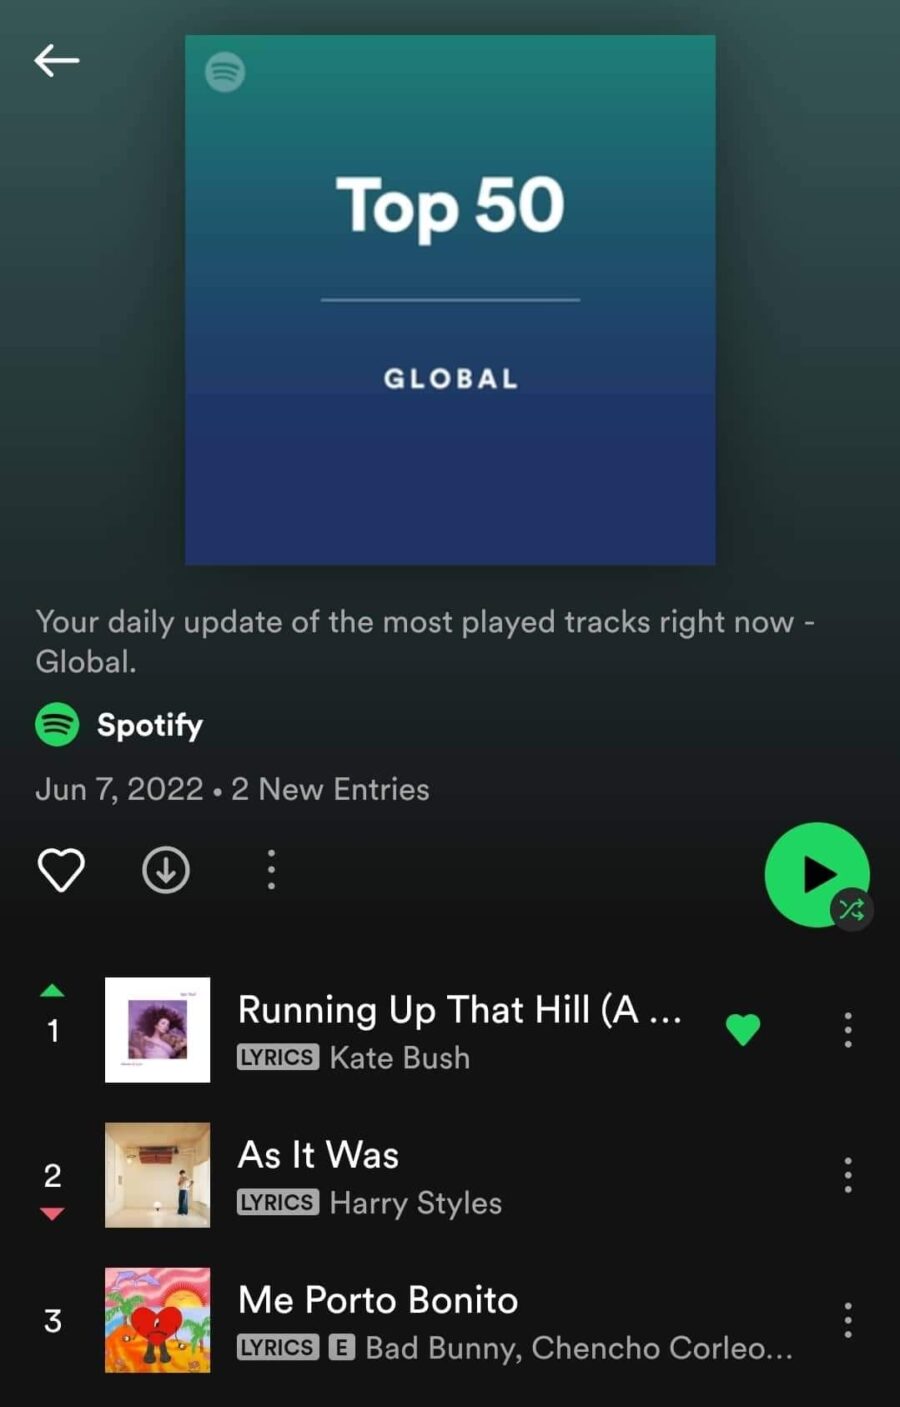 Spotify 7th June 2022 Global Daily chart